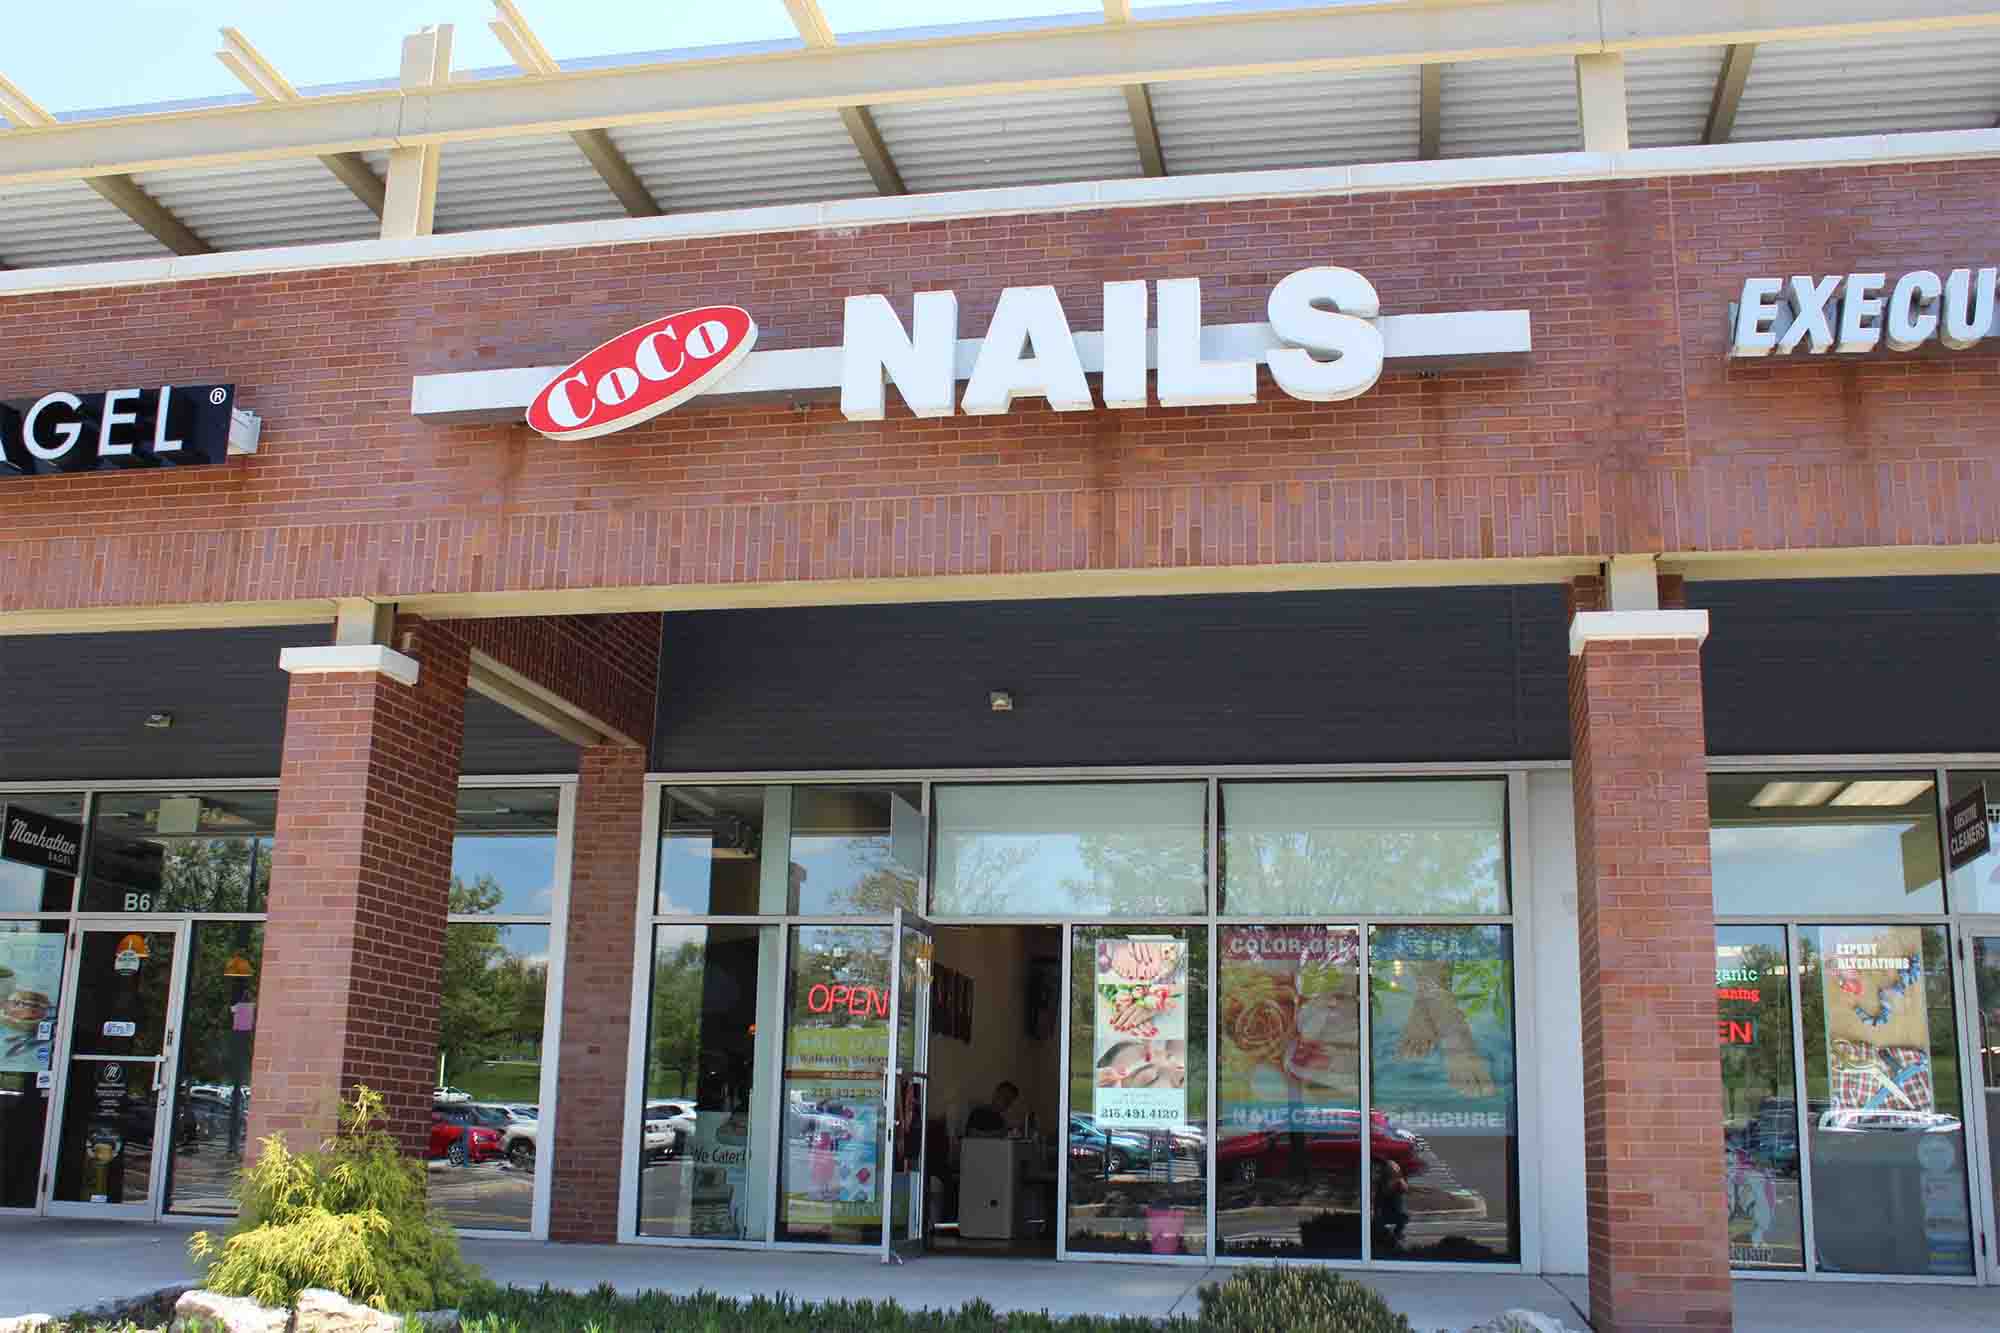 Coco’s Nails & Spa, the best nail salon in Warrington, PA. Offers manicures, pedicures, waxes, and facials in Greater Philadelphia Area.